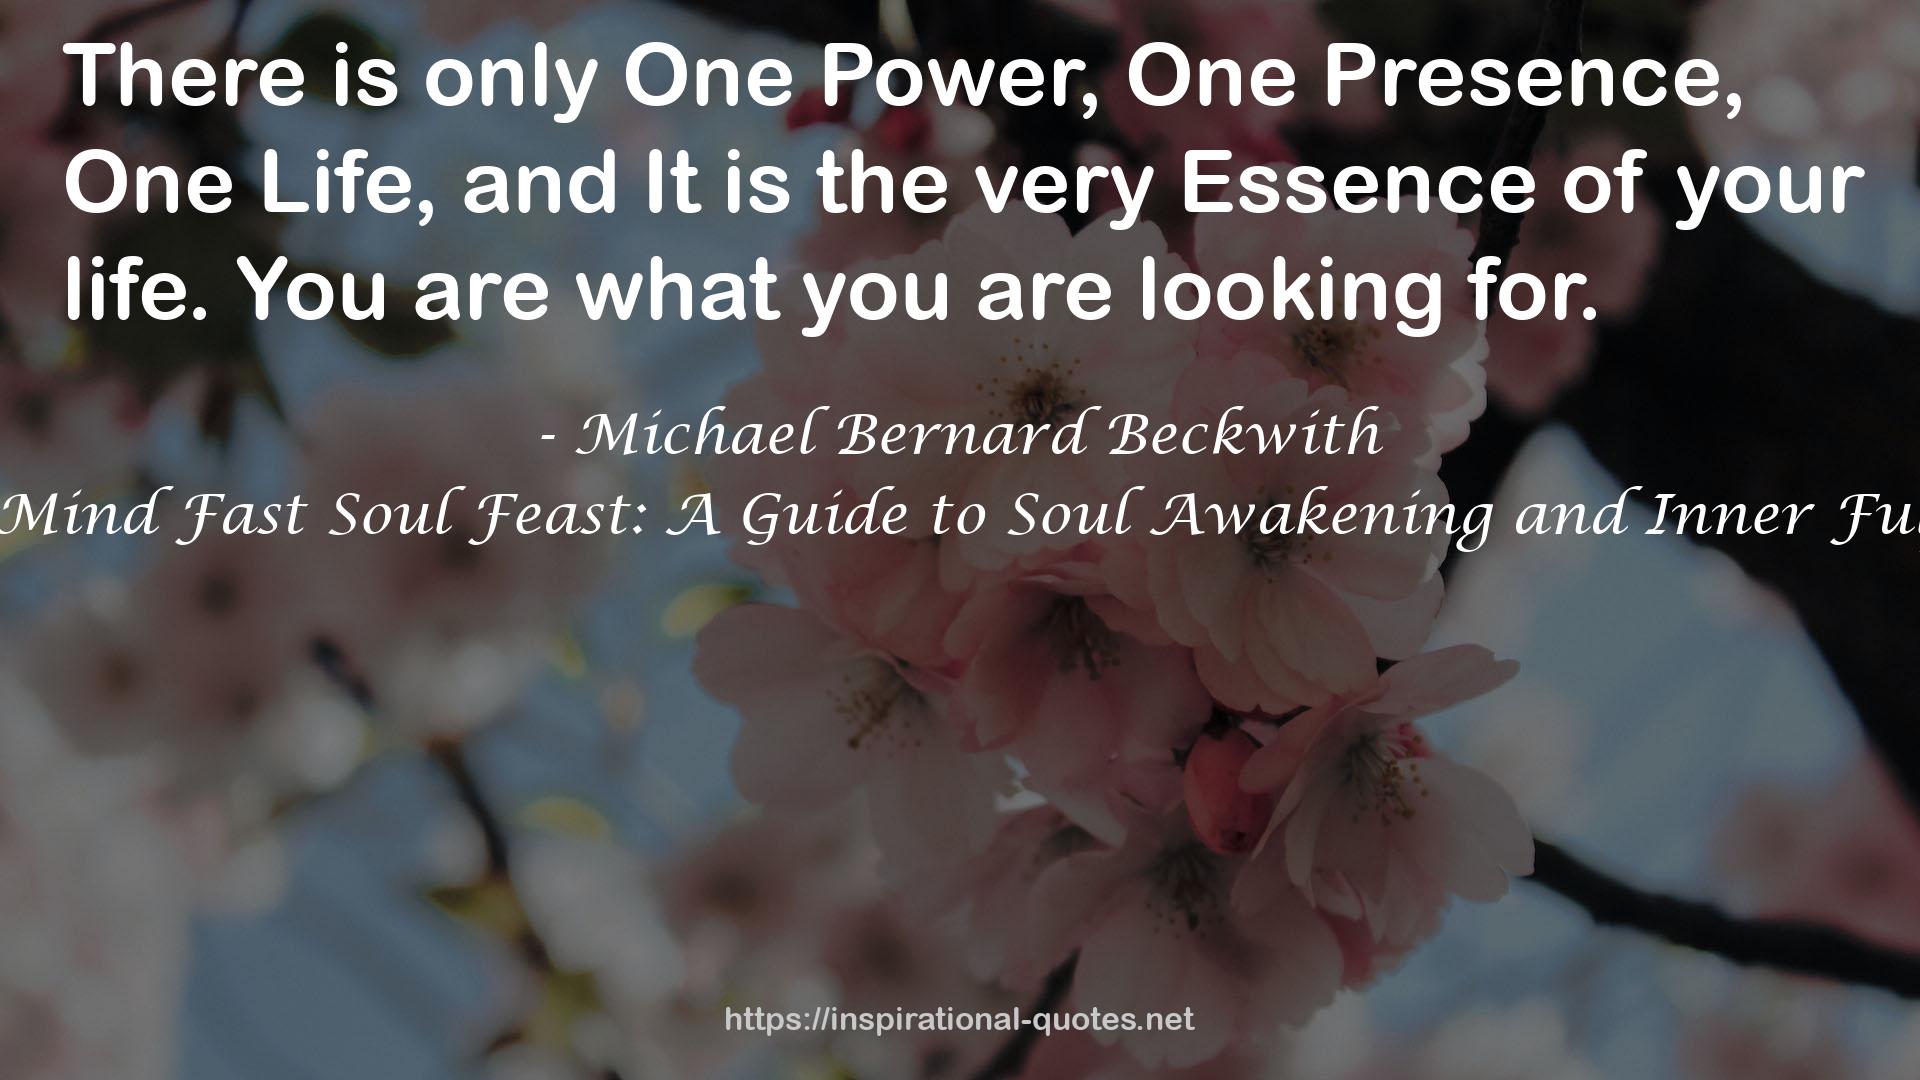 40 Day Mind Fast Soul Feast: A Guide to Soul Awakening and Inner Fulfillment QUOTES